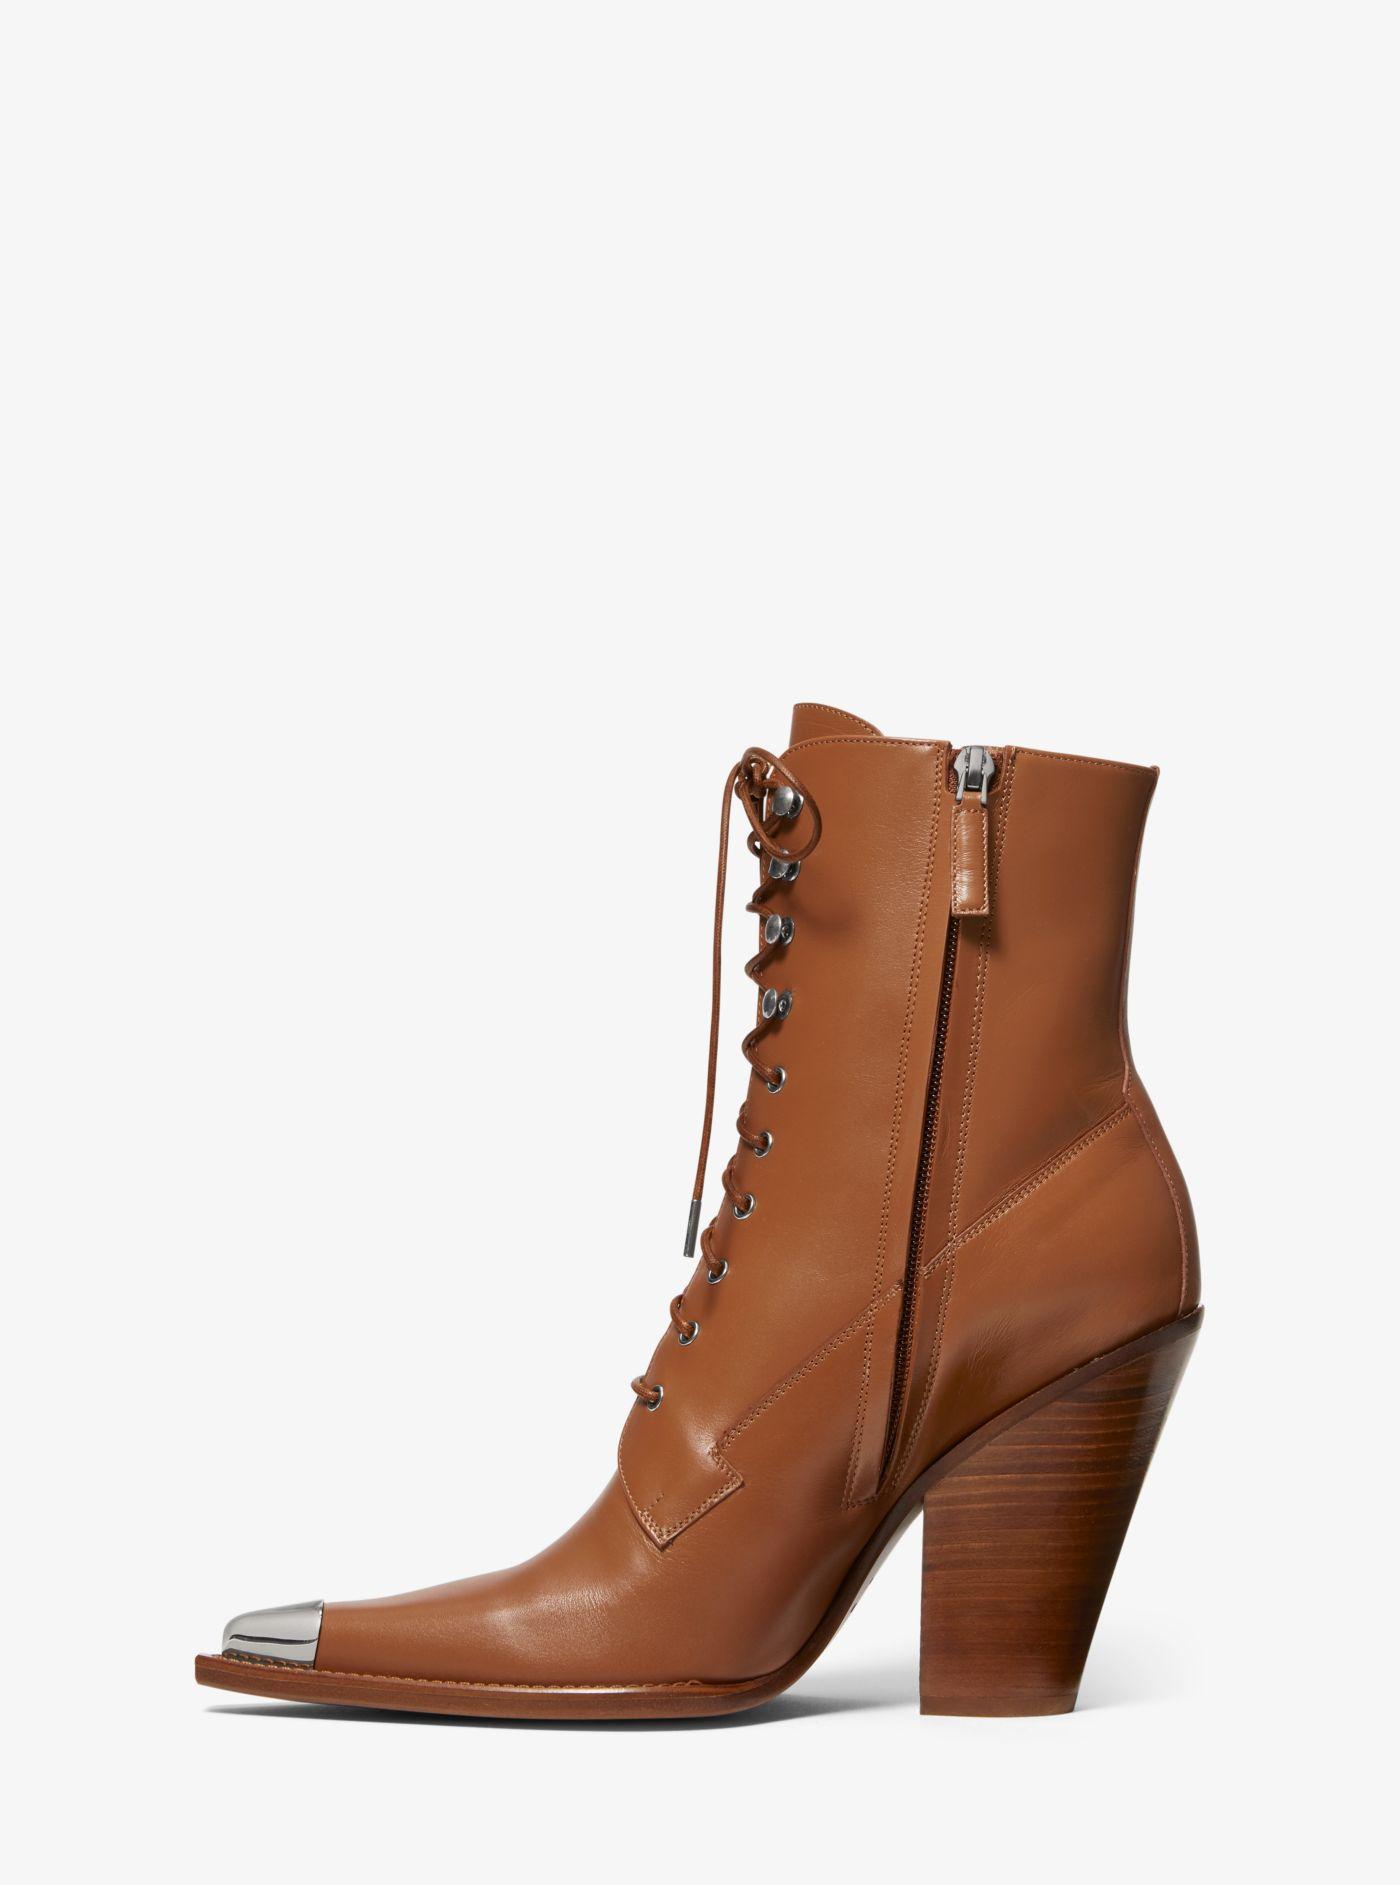 Total 38+ imagen michael kors brown leather boots - Abzlocal.mx